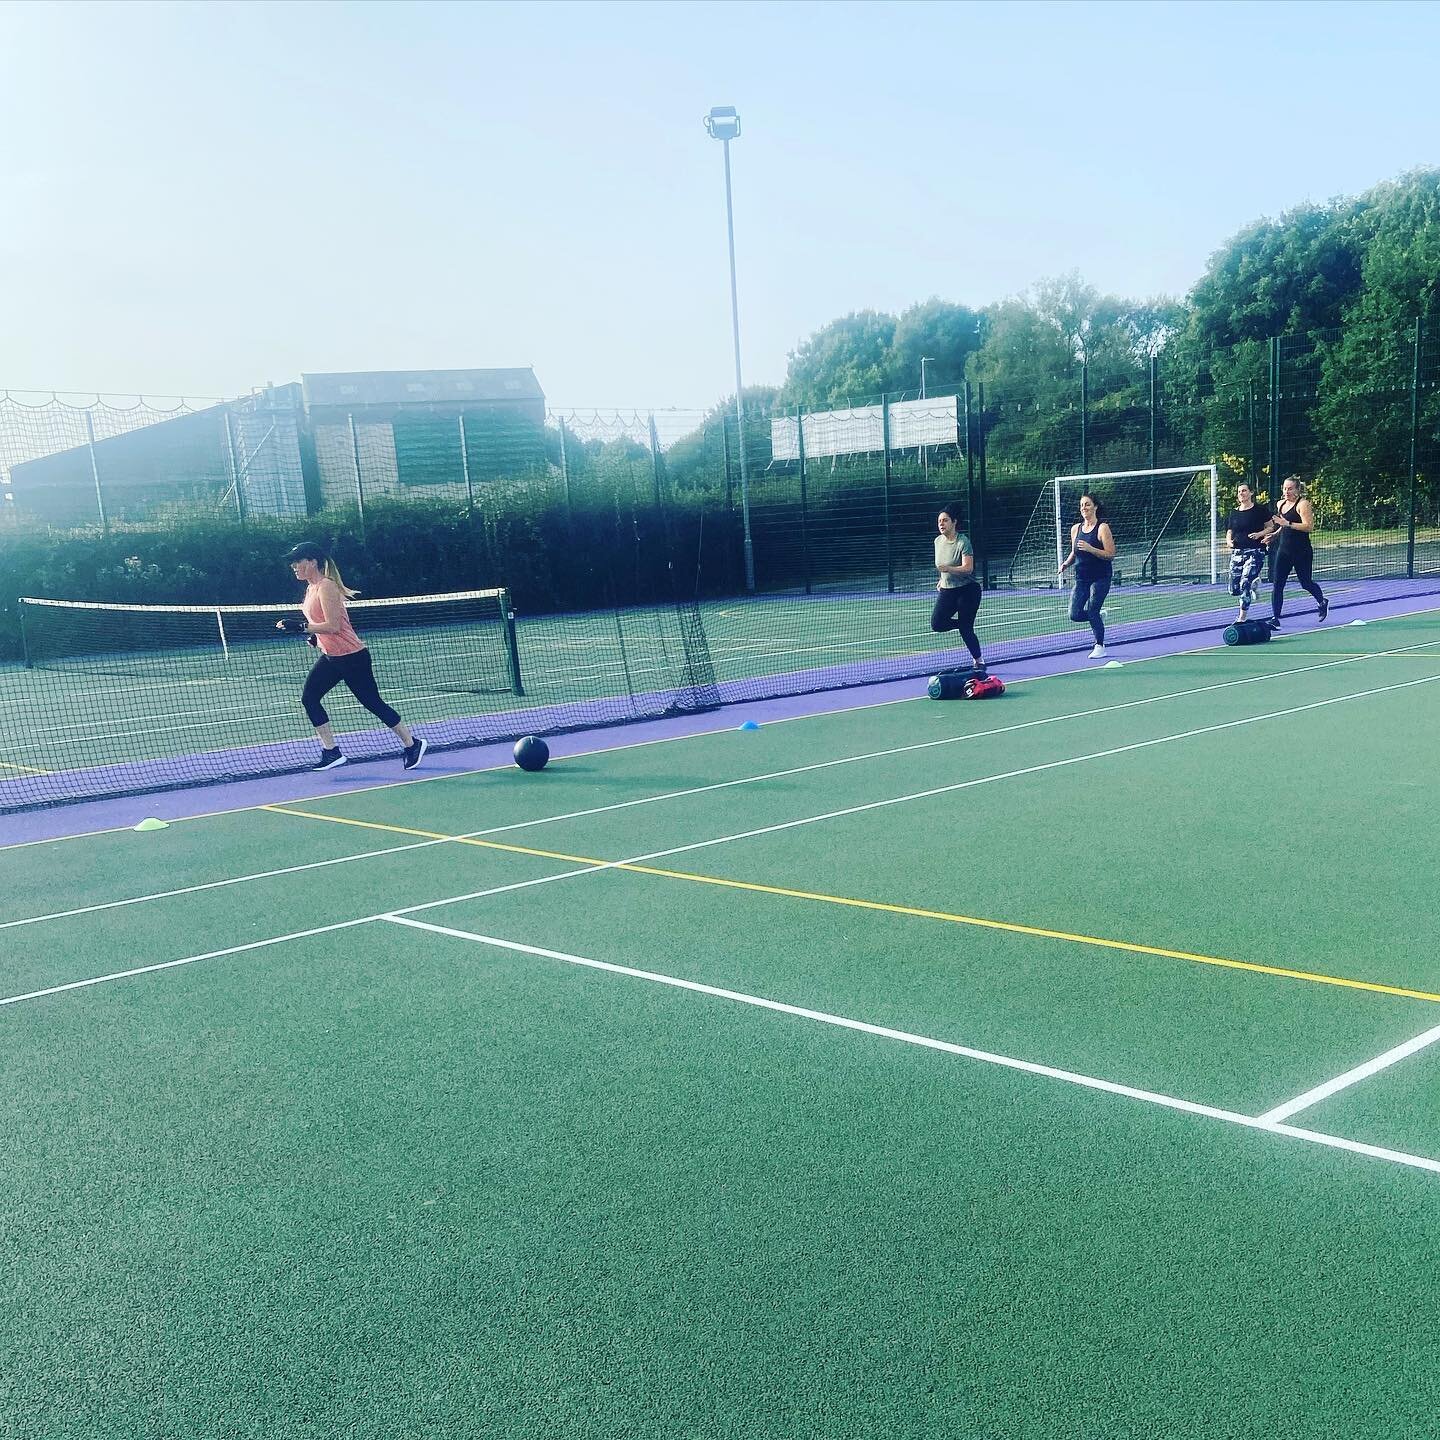 New equipment for the new block of Warrior Tribe today!! LOVE battle ropes!

It was sooooo warm this morning but all done and dusted by 10am ready for a day in the sunshine ☀️ 

Fancy joining us? I have two spaces left on this block after a couple of